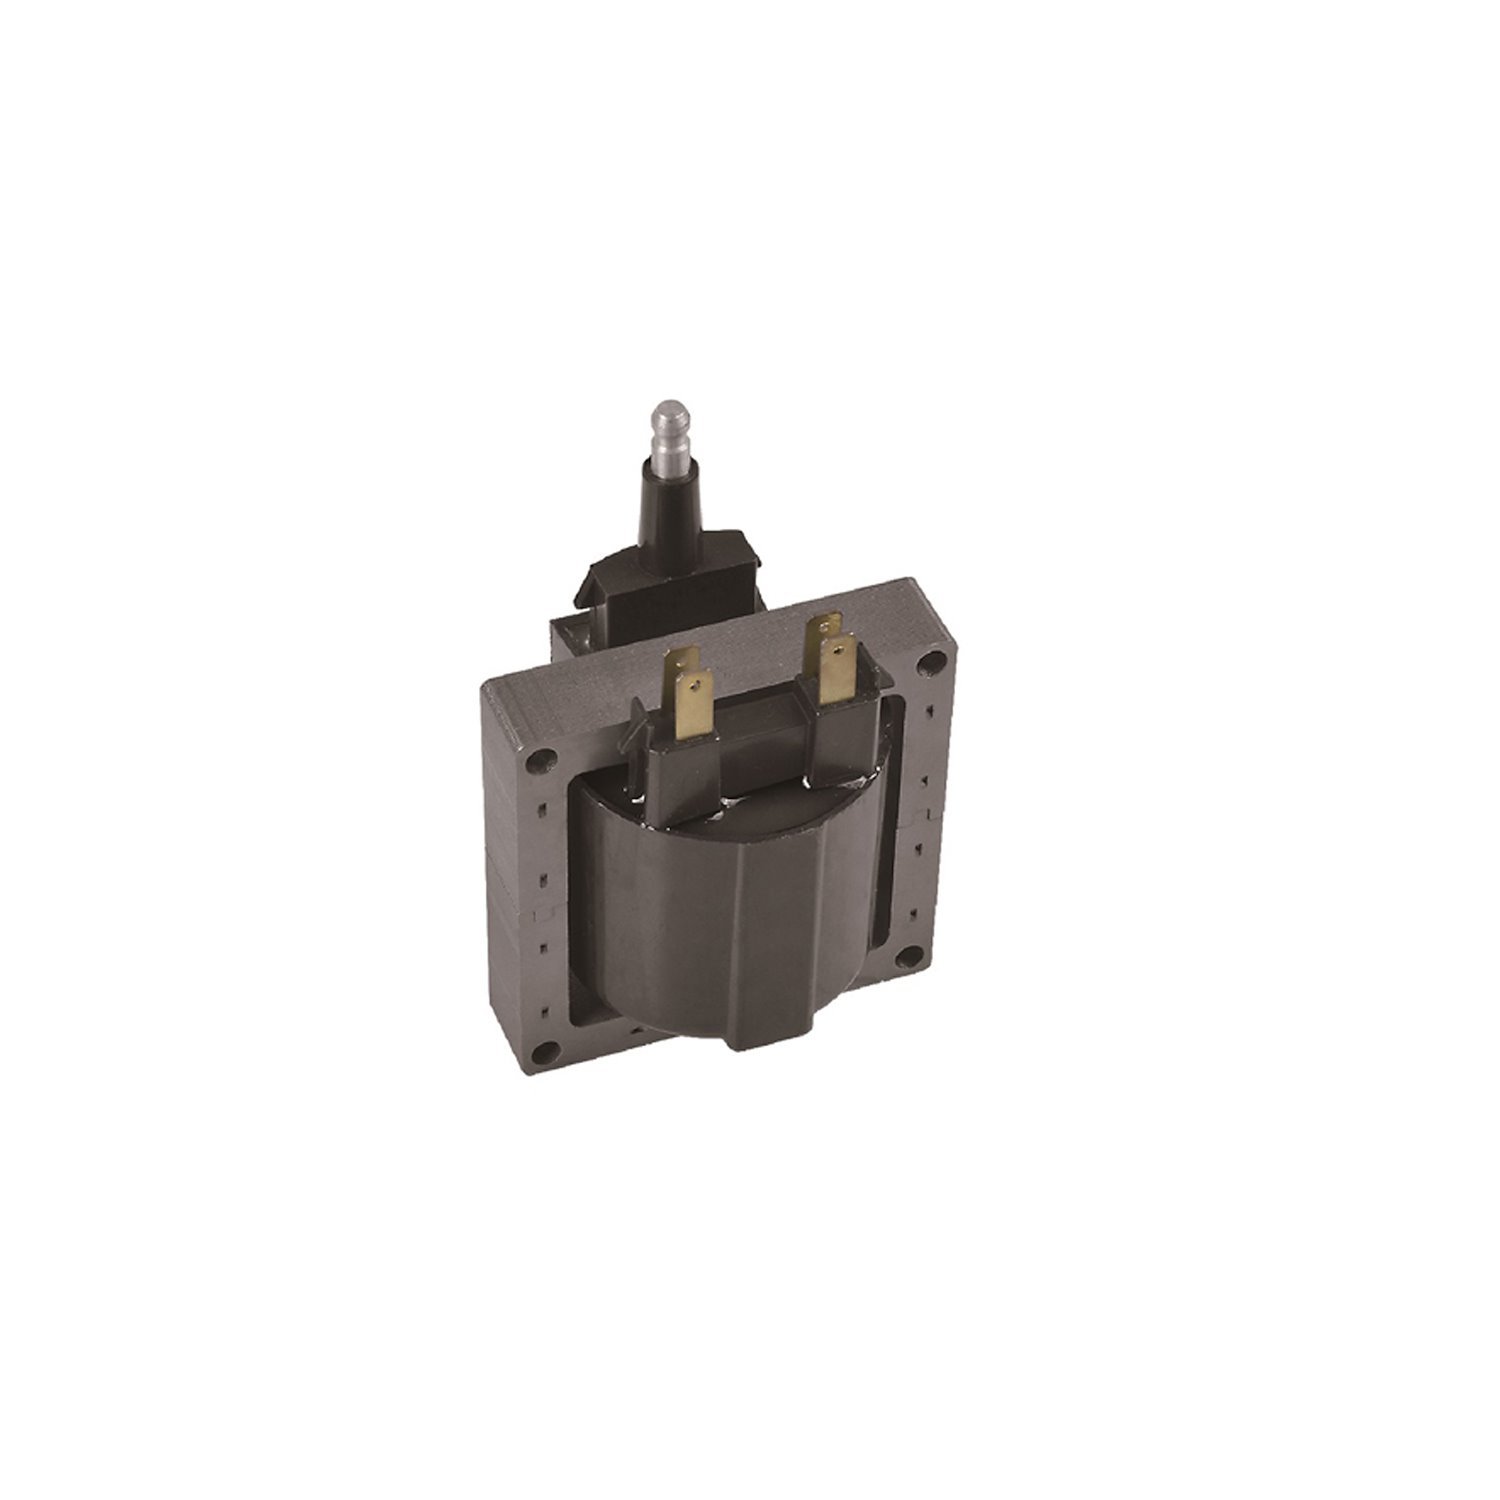 OE Replacement Ignition Coil for 1975-1984 Buick, Chevrolet,